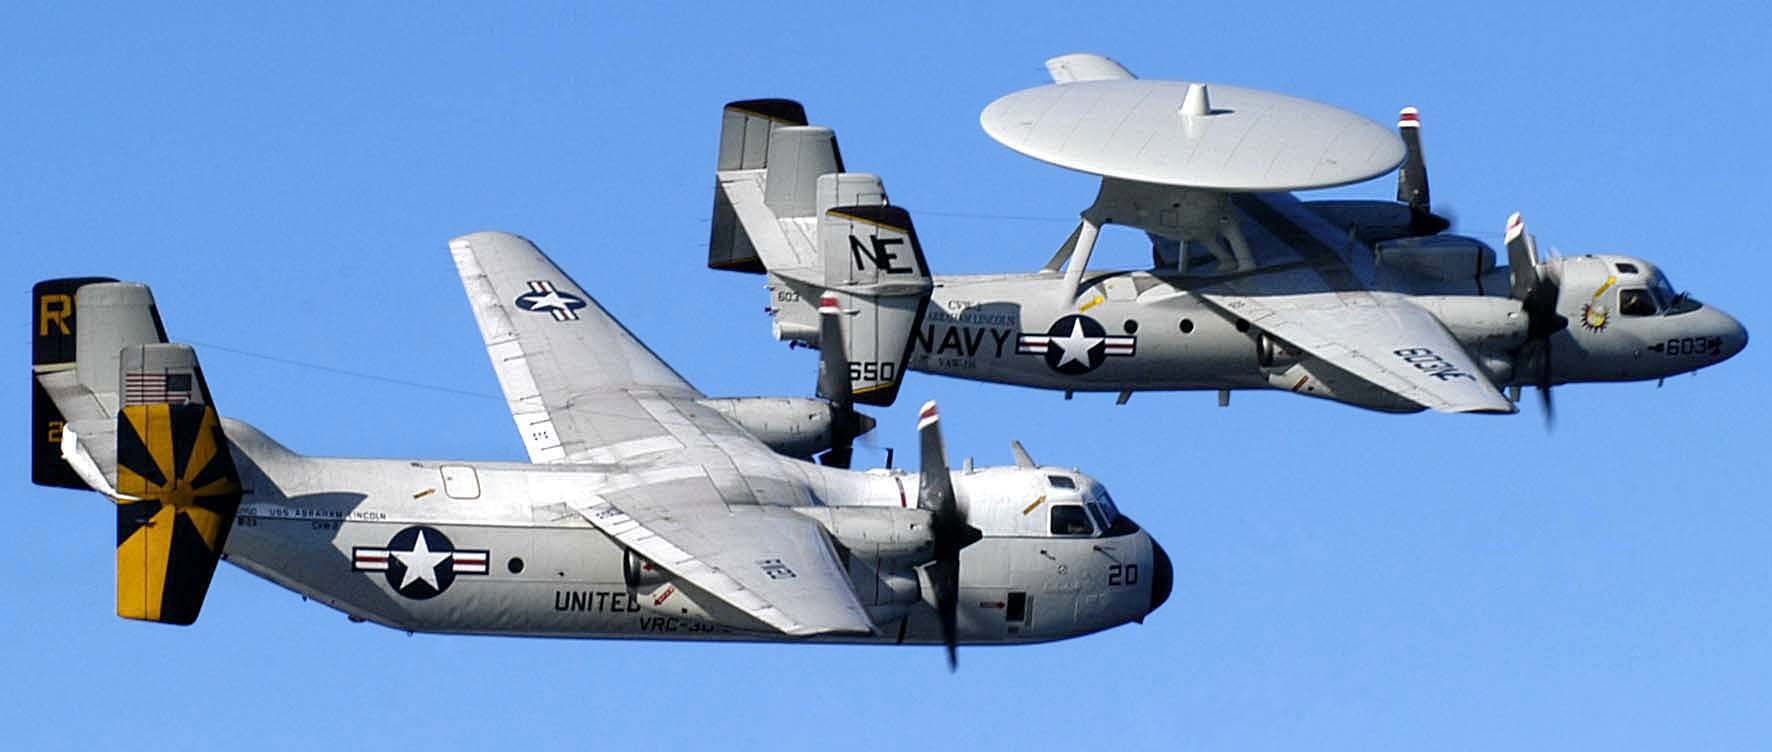 vaw-116 sun kings airborne command control squadron carrier early warning cvw-2 uss abraham lincoln cvn-72 11